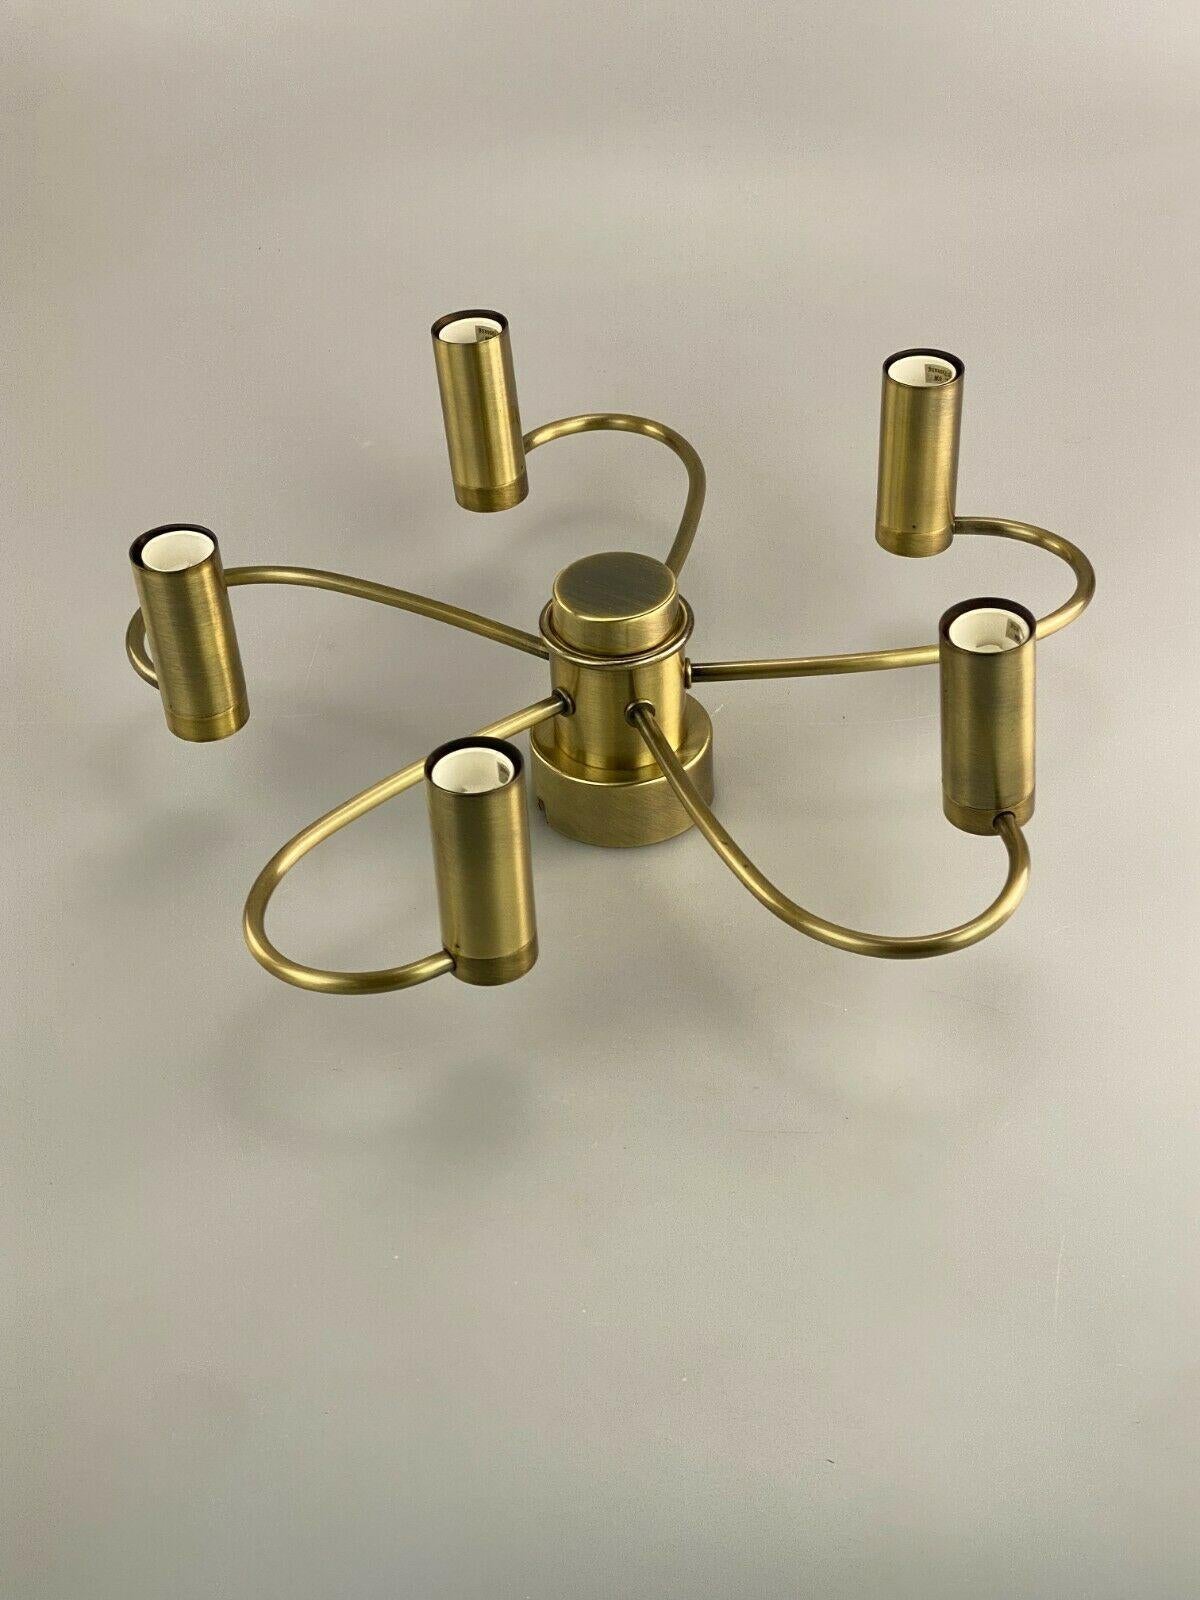 60s 70s ceiling lamp lamp light Honsel Leuchten Space Age 60s 70s

Object: ceiling lamp

Manufacturer: Honsel lights

Condition: good

Age: around 1960-1970

Dimensions:

Diameter = 38cm
Height = 12cm

Other notes:

The pictures